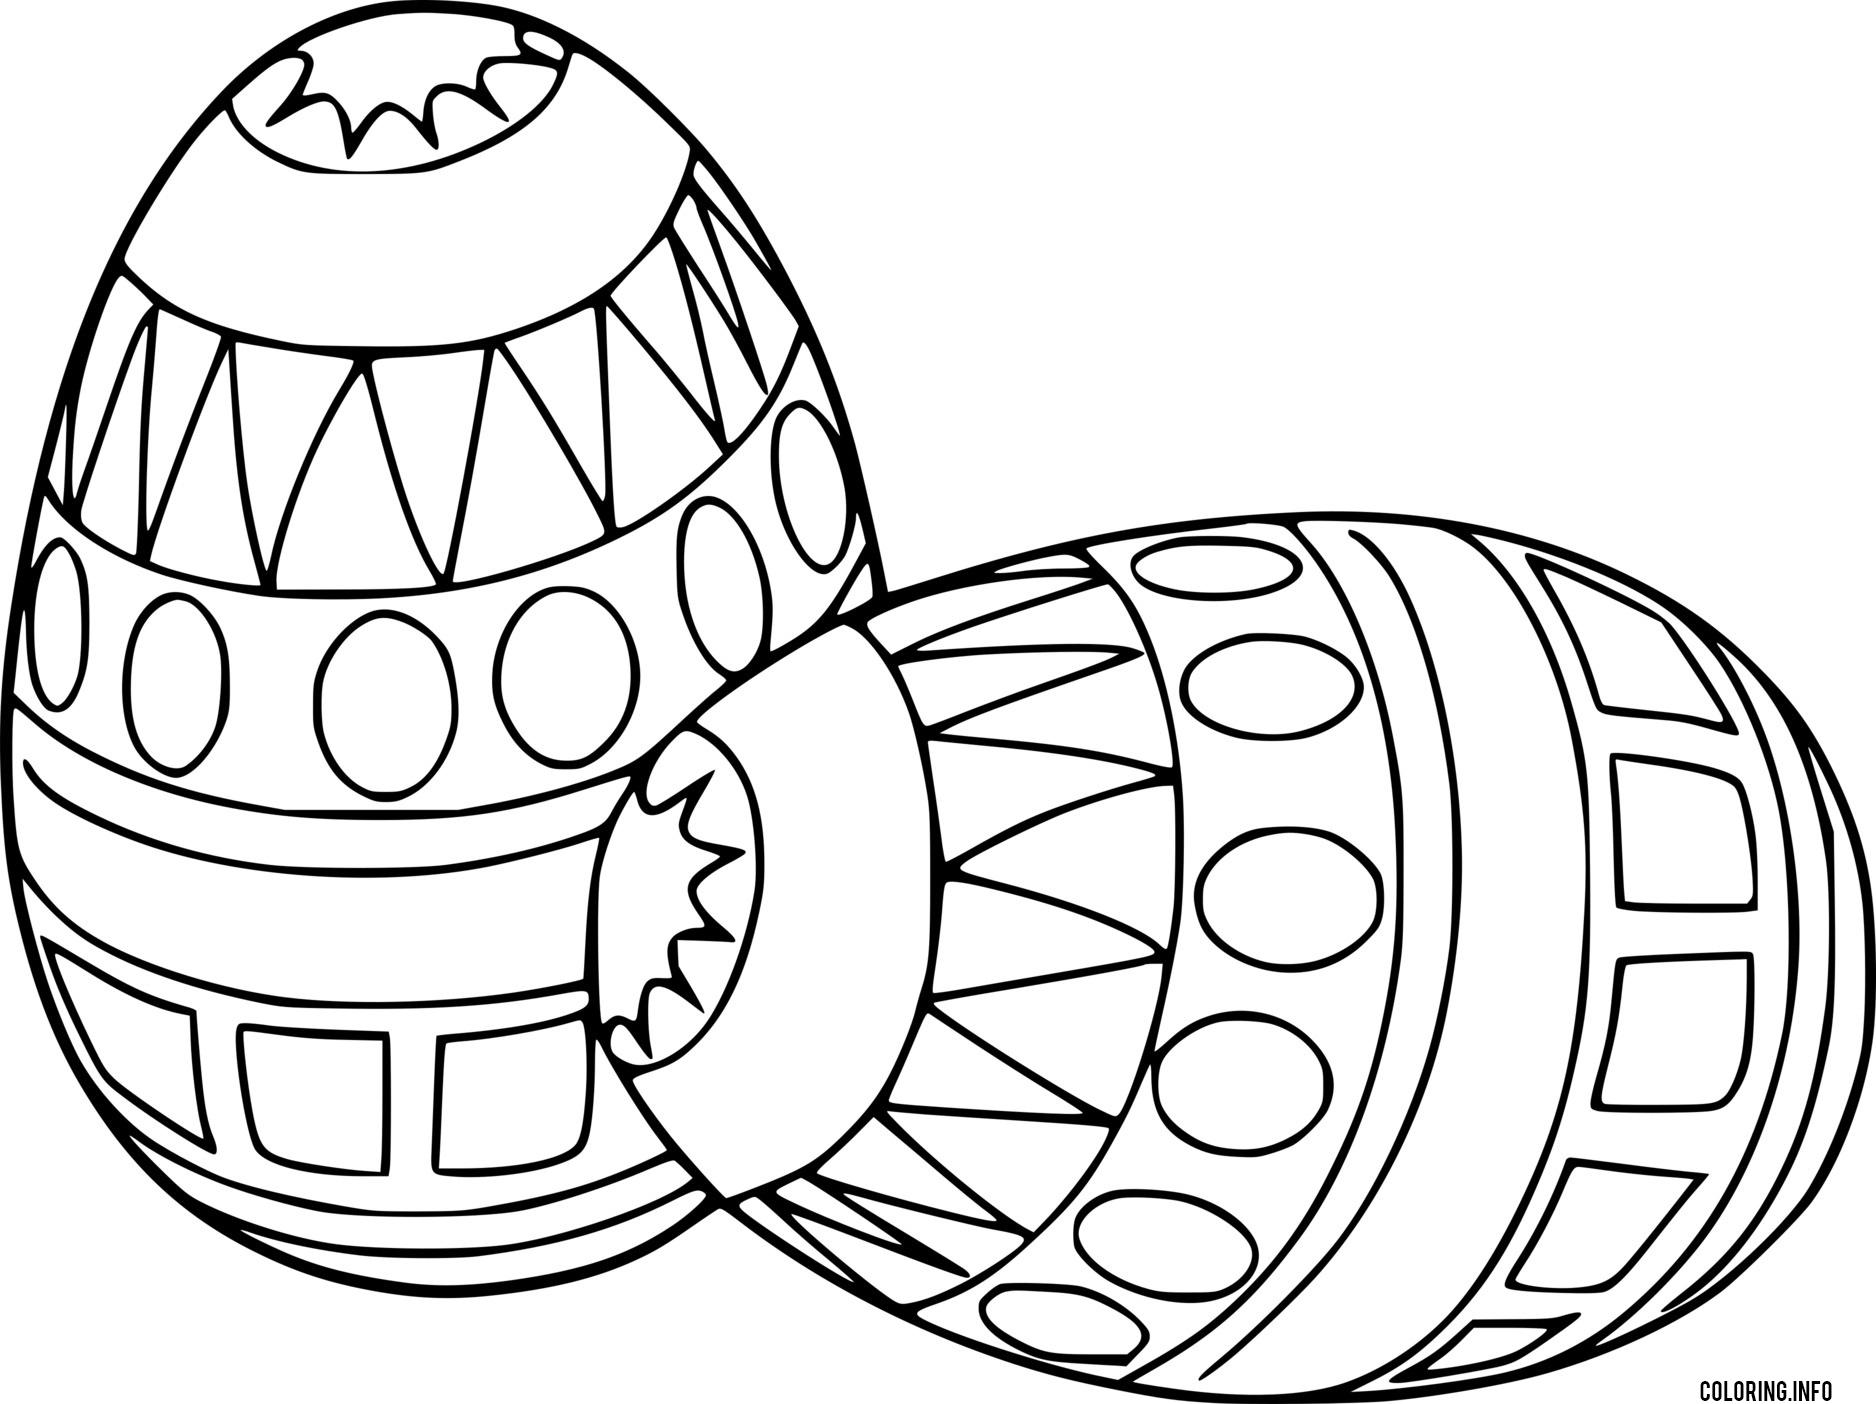 Two Easter Eggs With Square Patterns coloring